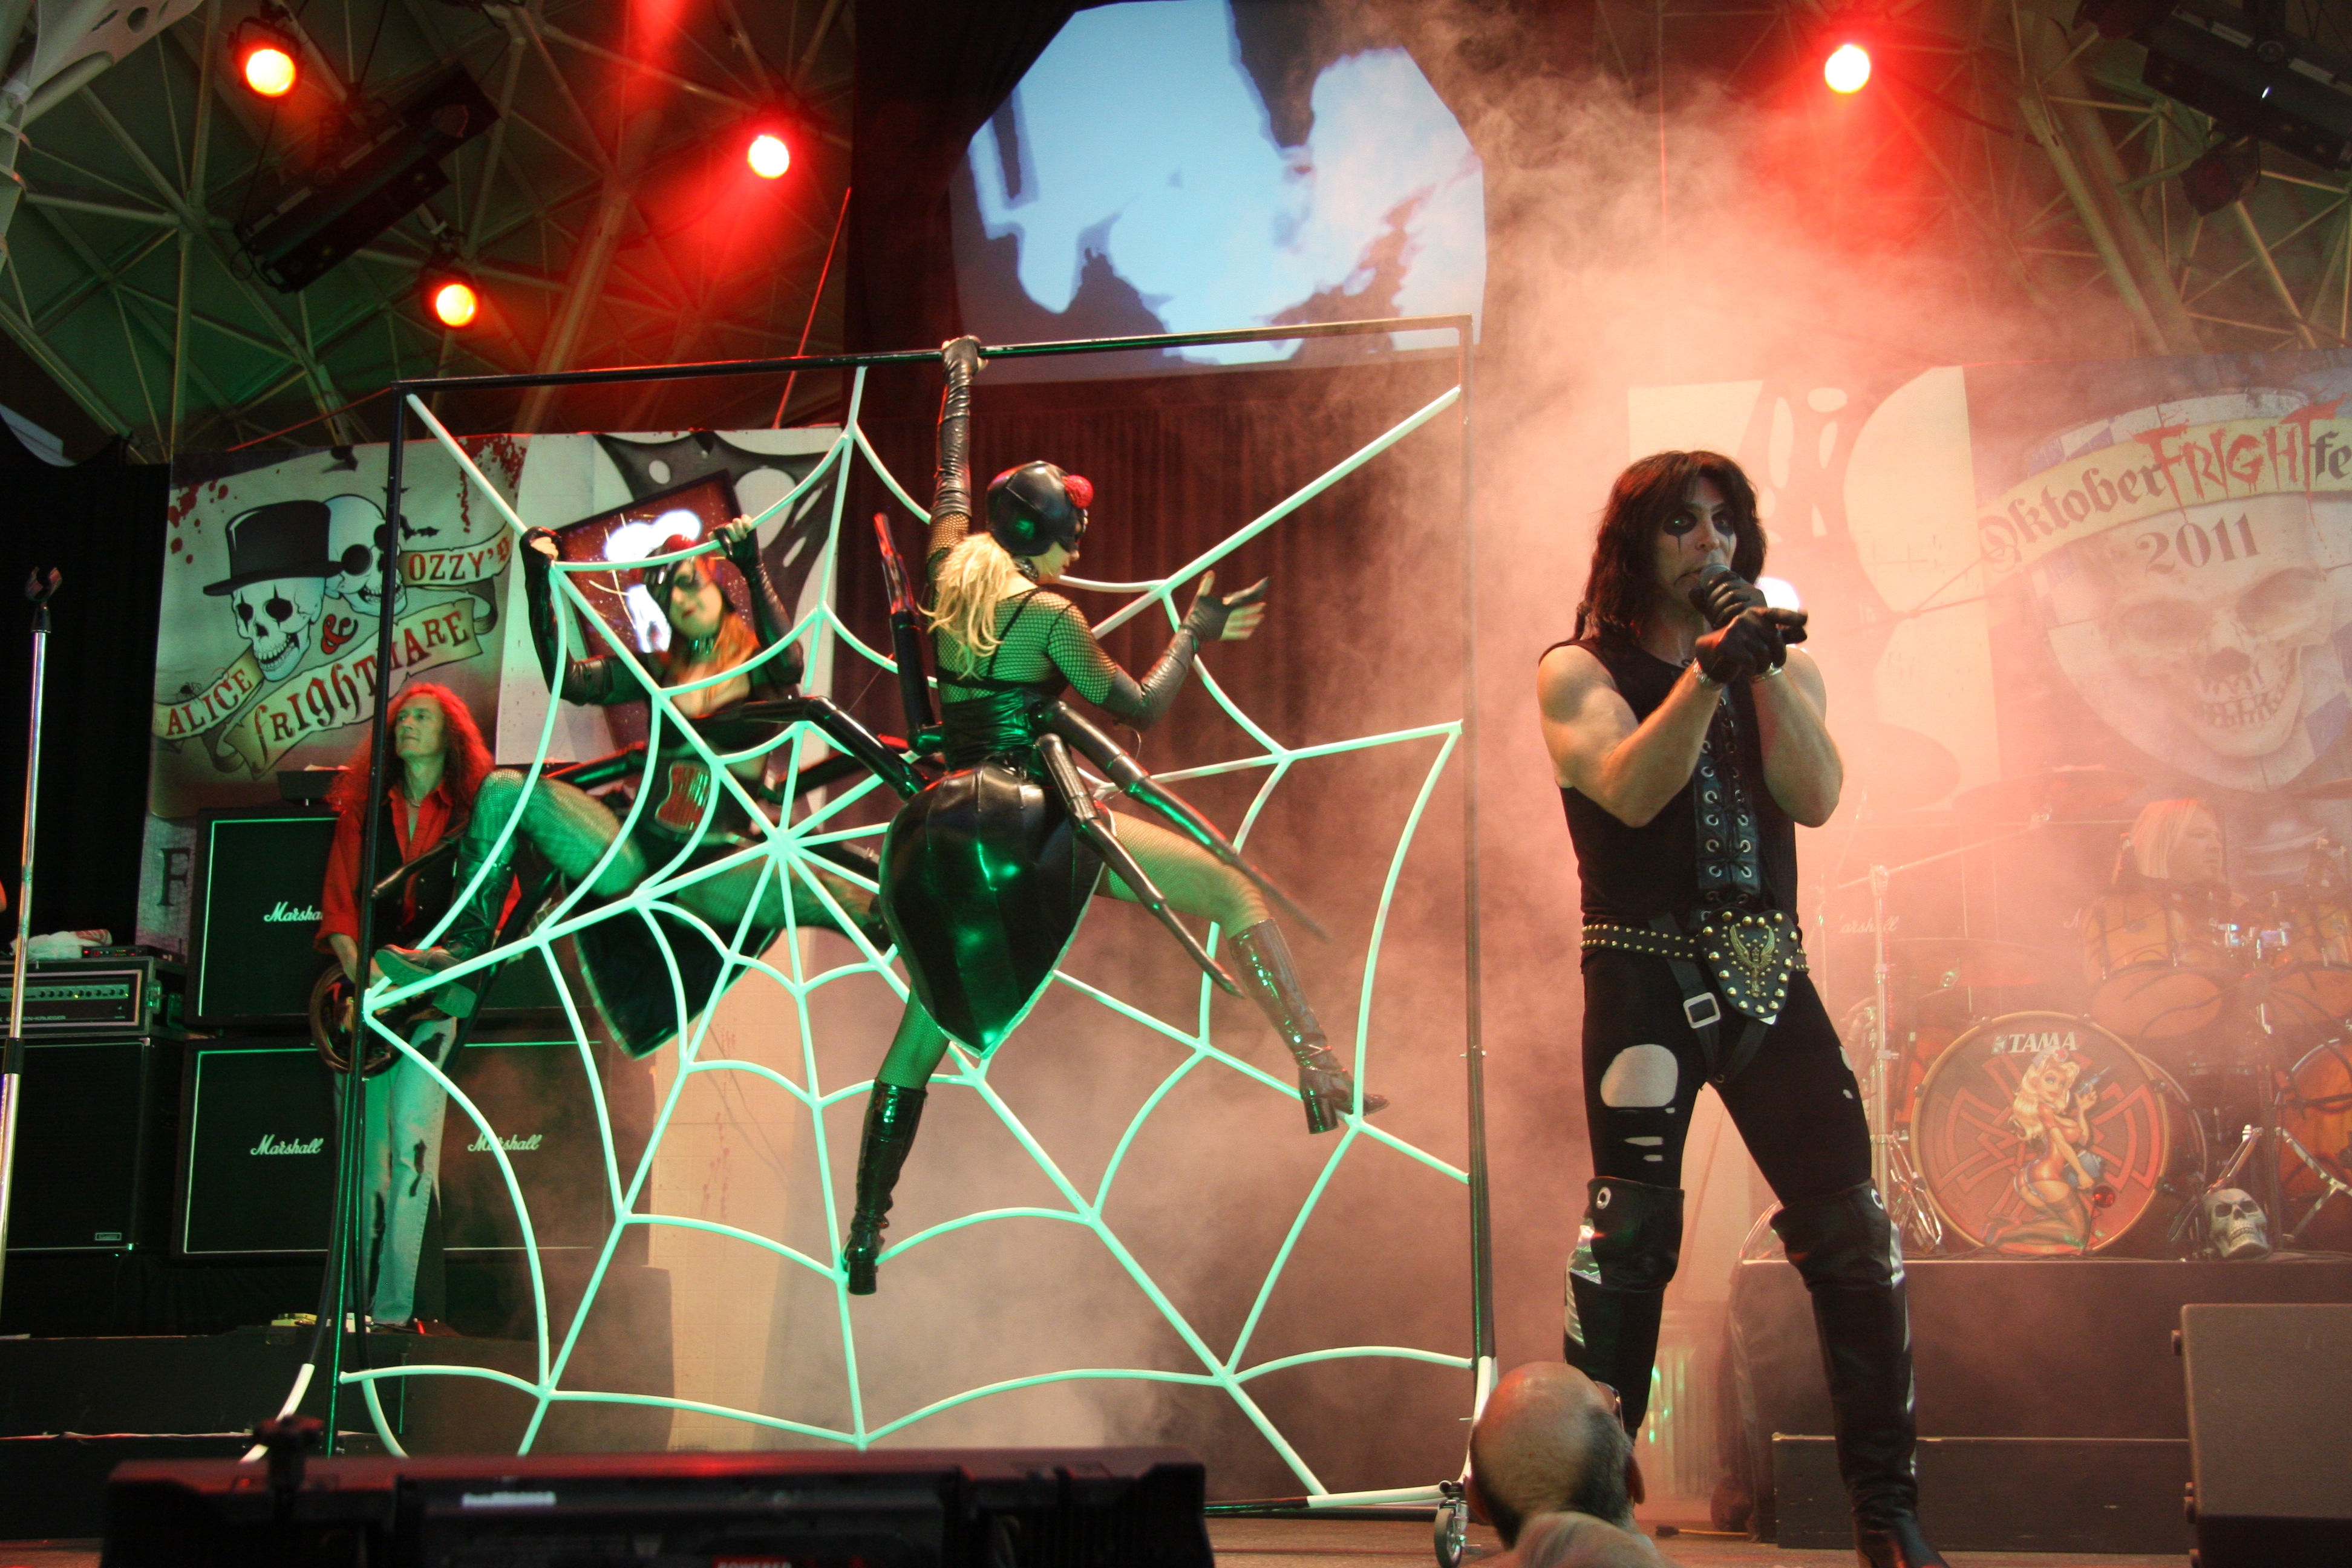 The Alice Cooper Experience with Rob Valentine as Alice Cooper